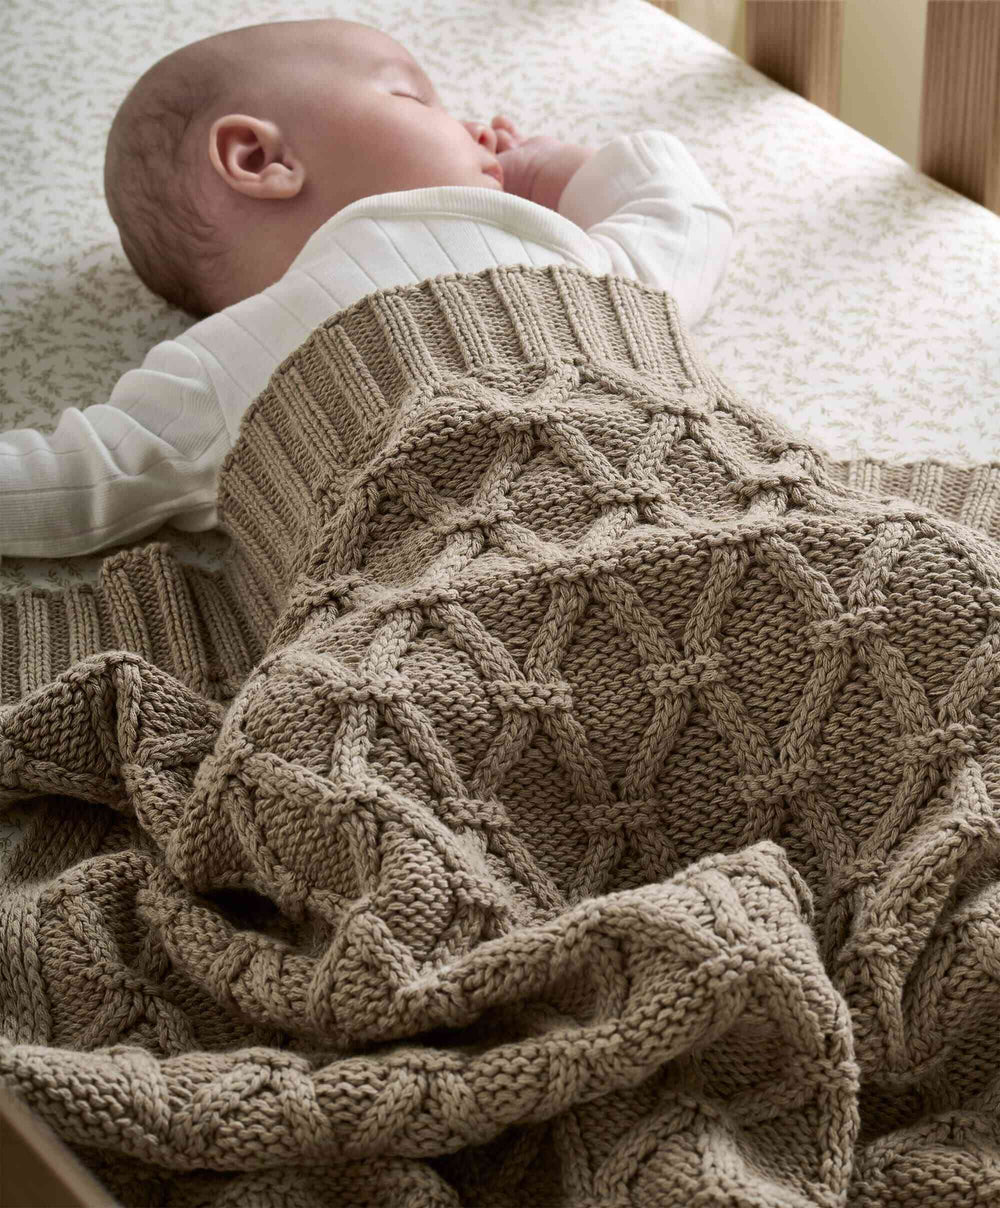 Mamas & Papas Welcome to the World Seedling Knitted Blanket - Diamond